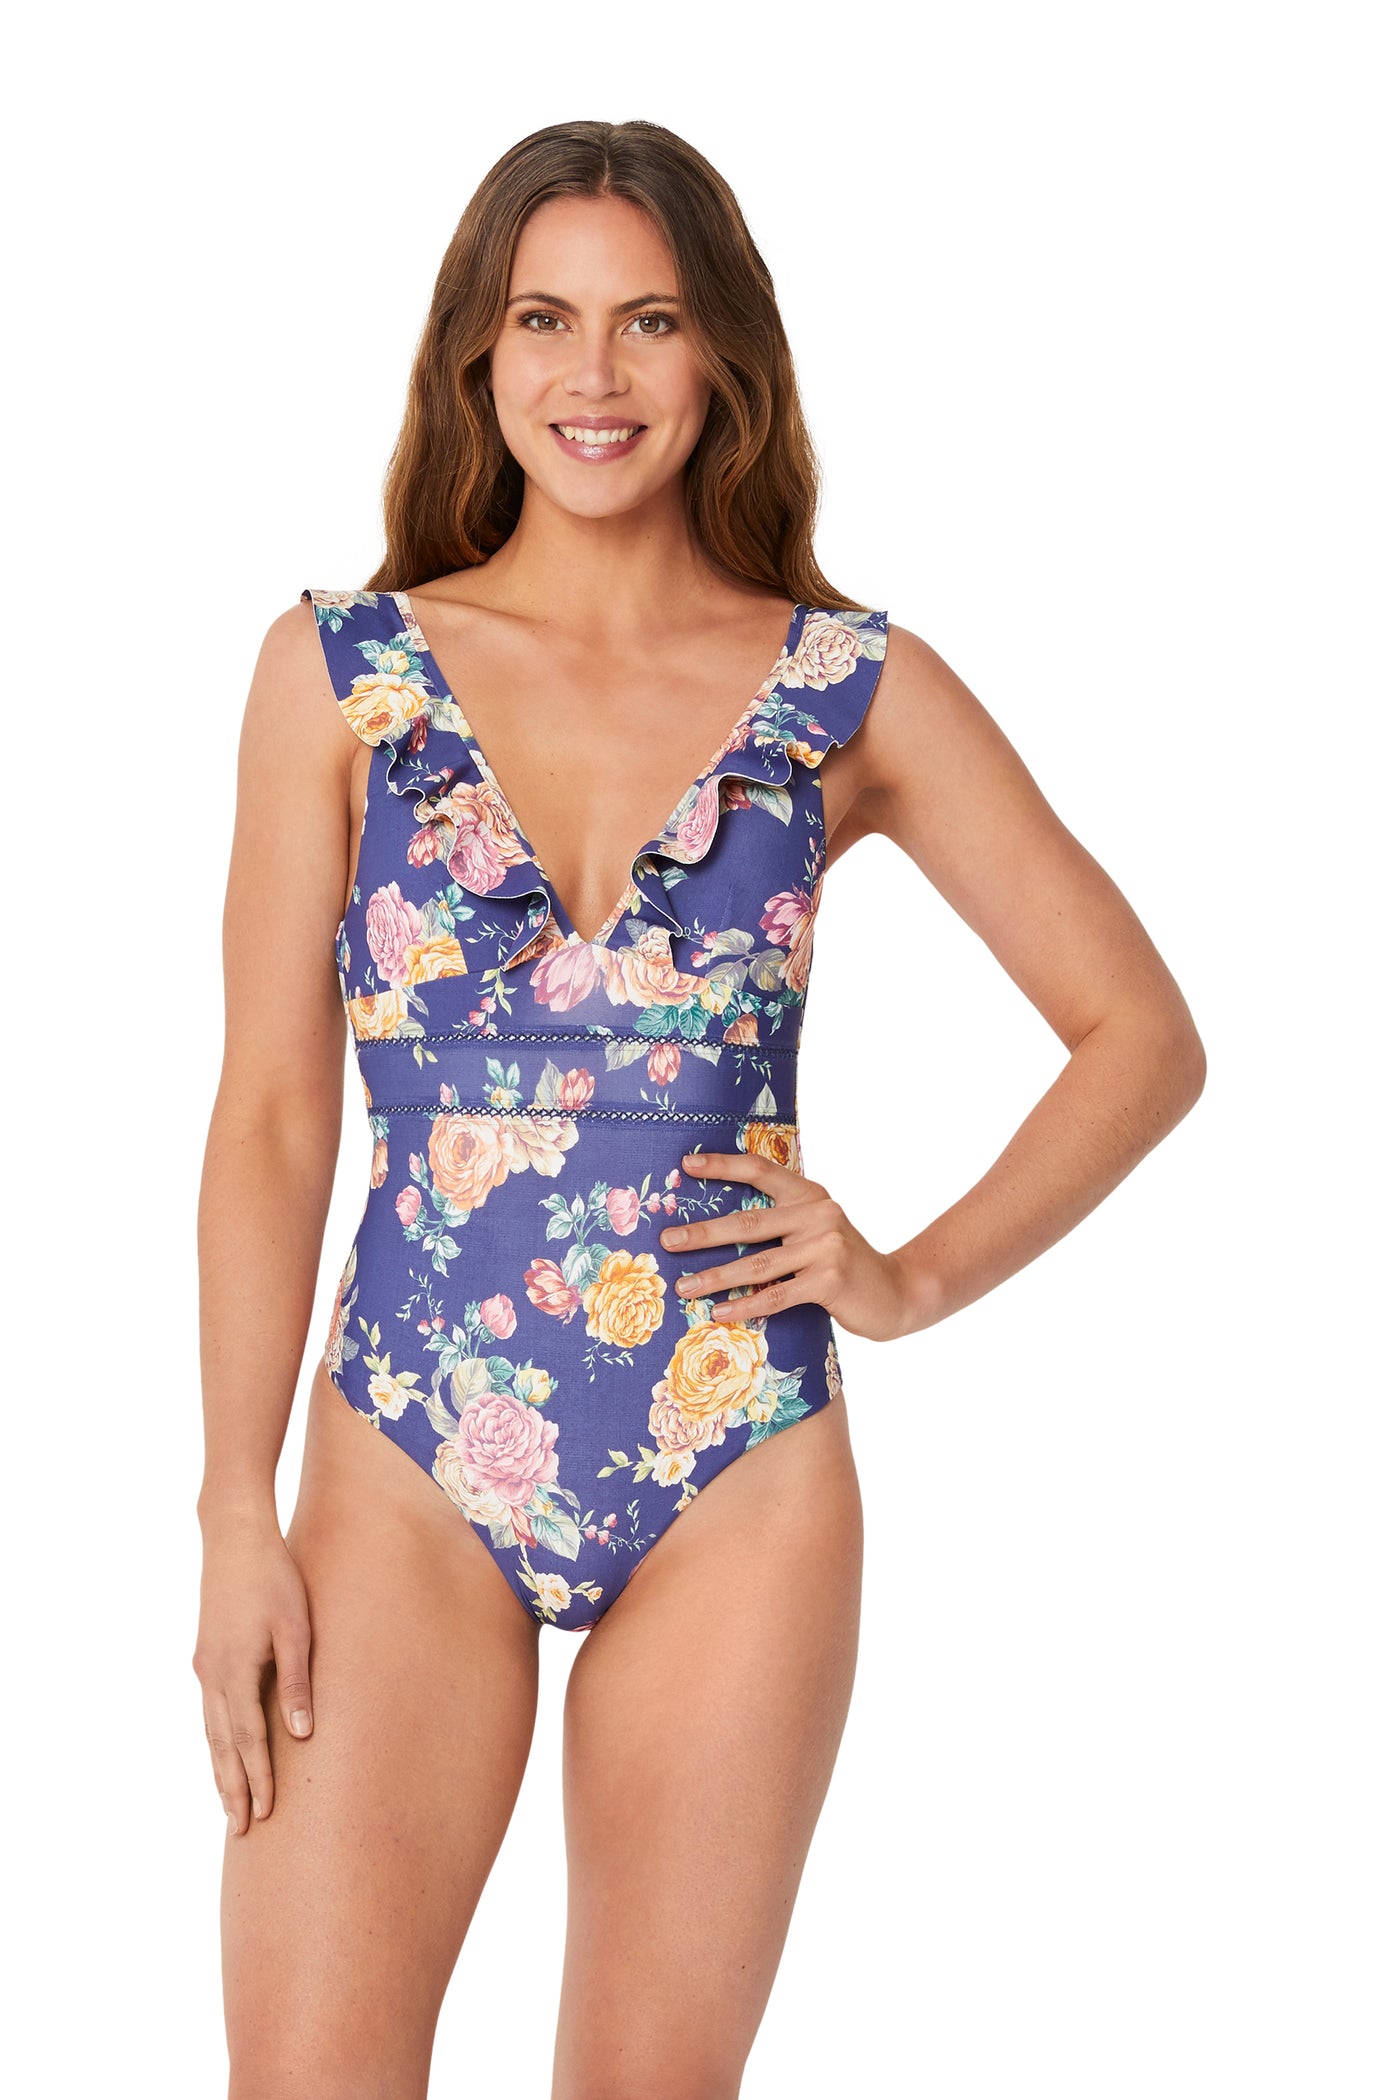 Brightest Bloom Multi Fit Frill Maillot - Monte & Lou